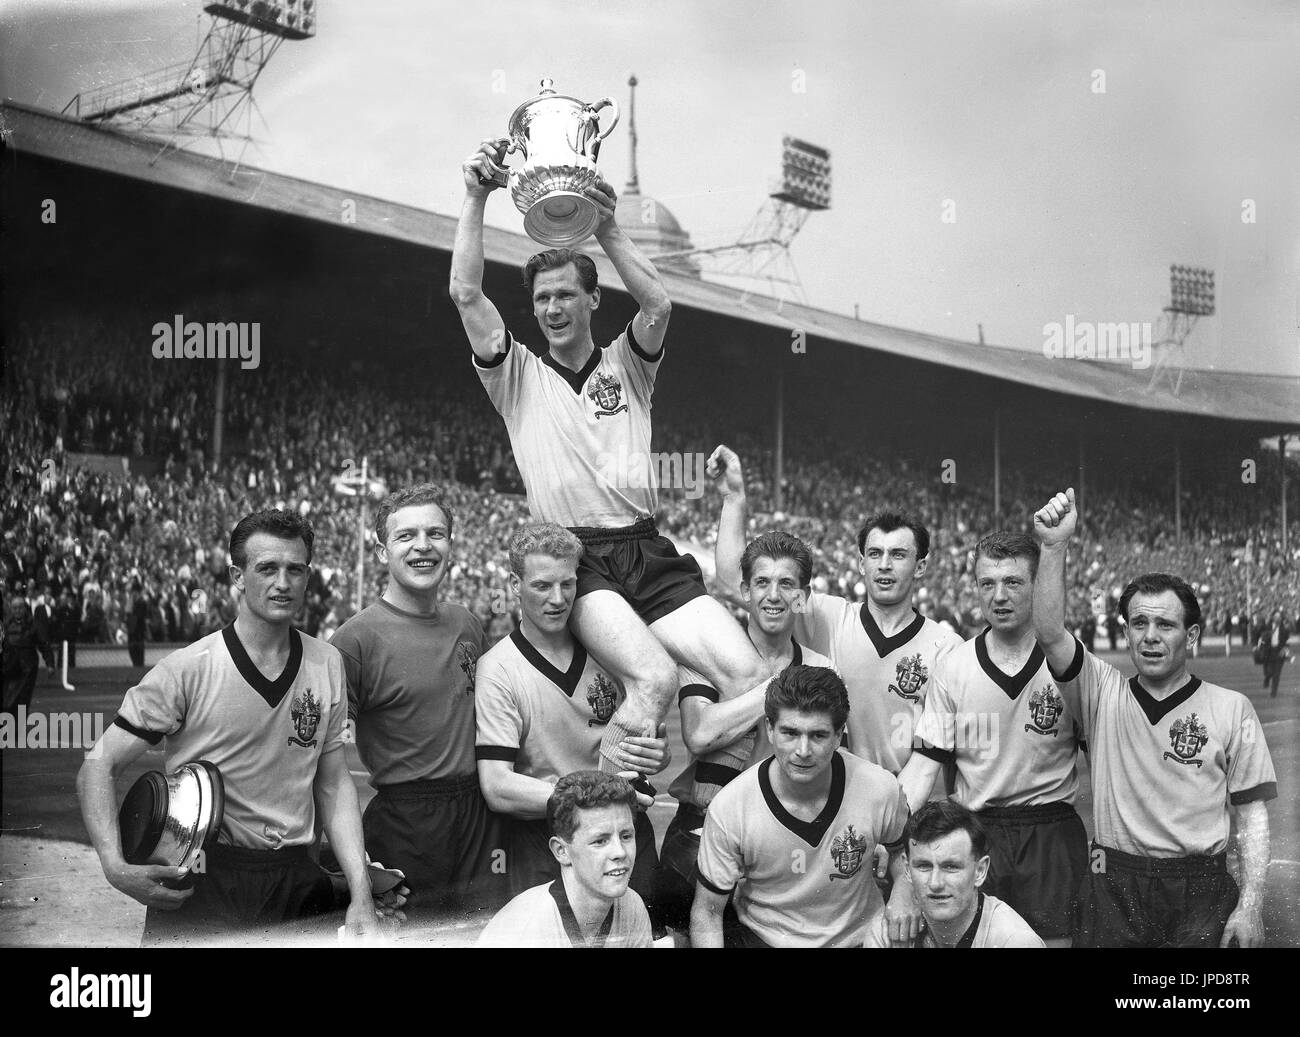 The 1960 FA Cup final winners Wolverhampton Wanderers with the captain Bill Slater holding the cup. 1960 FA Cup winners Wolverhampton Wanderers at Wembley 7/5/60 Captain Bill Slater holds the cup with standing LtoR Gerry Harris, Malcolm Finlayson, Ron Flowers, Peter Broadbent, Eddie Clamp, George Showell, Norman Deeley. Kneeling Barry Stobart, Des Horne, Jimmy Murray. Wolves FA Cup win Wembley Stadium Stock Photo